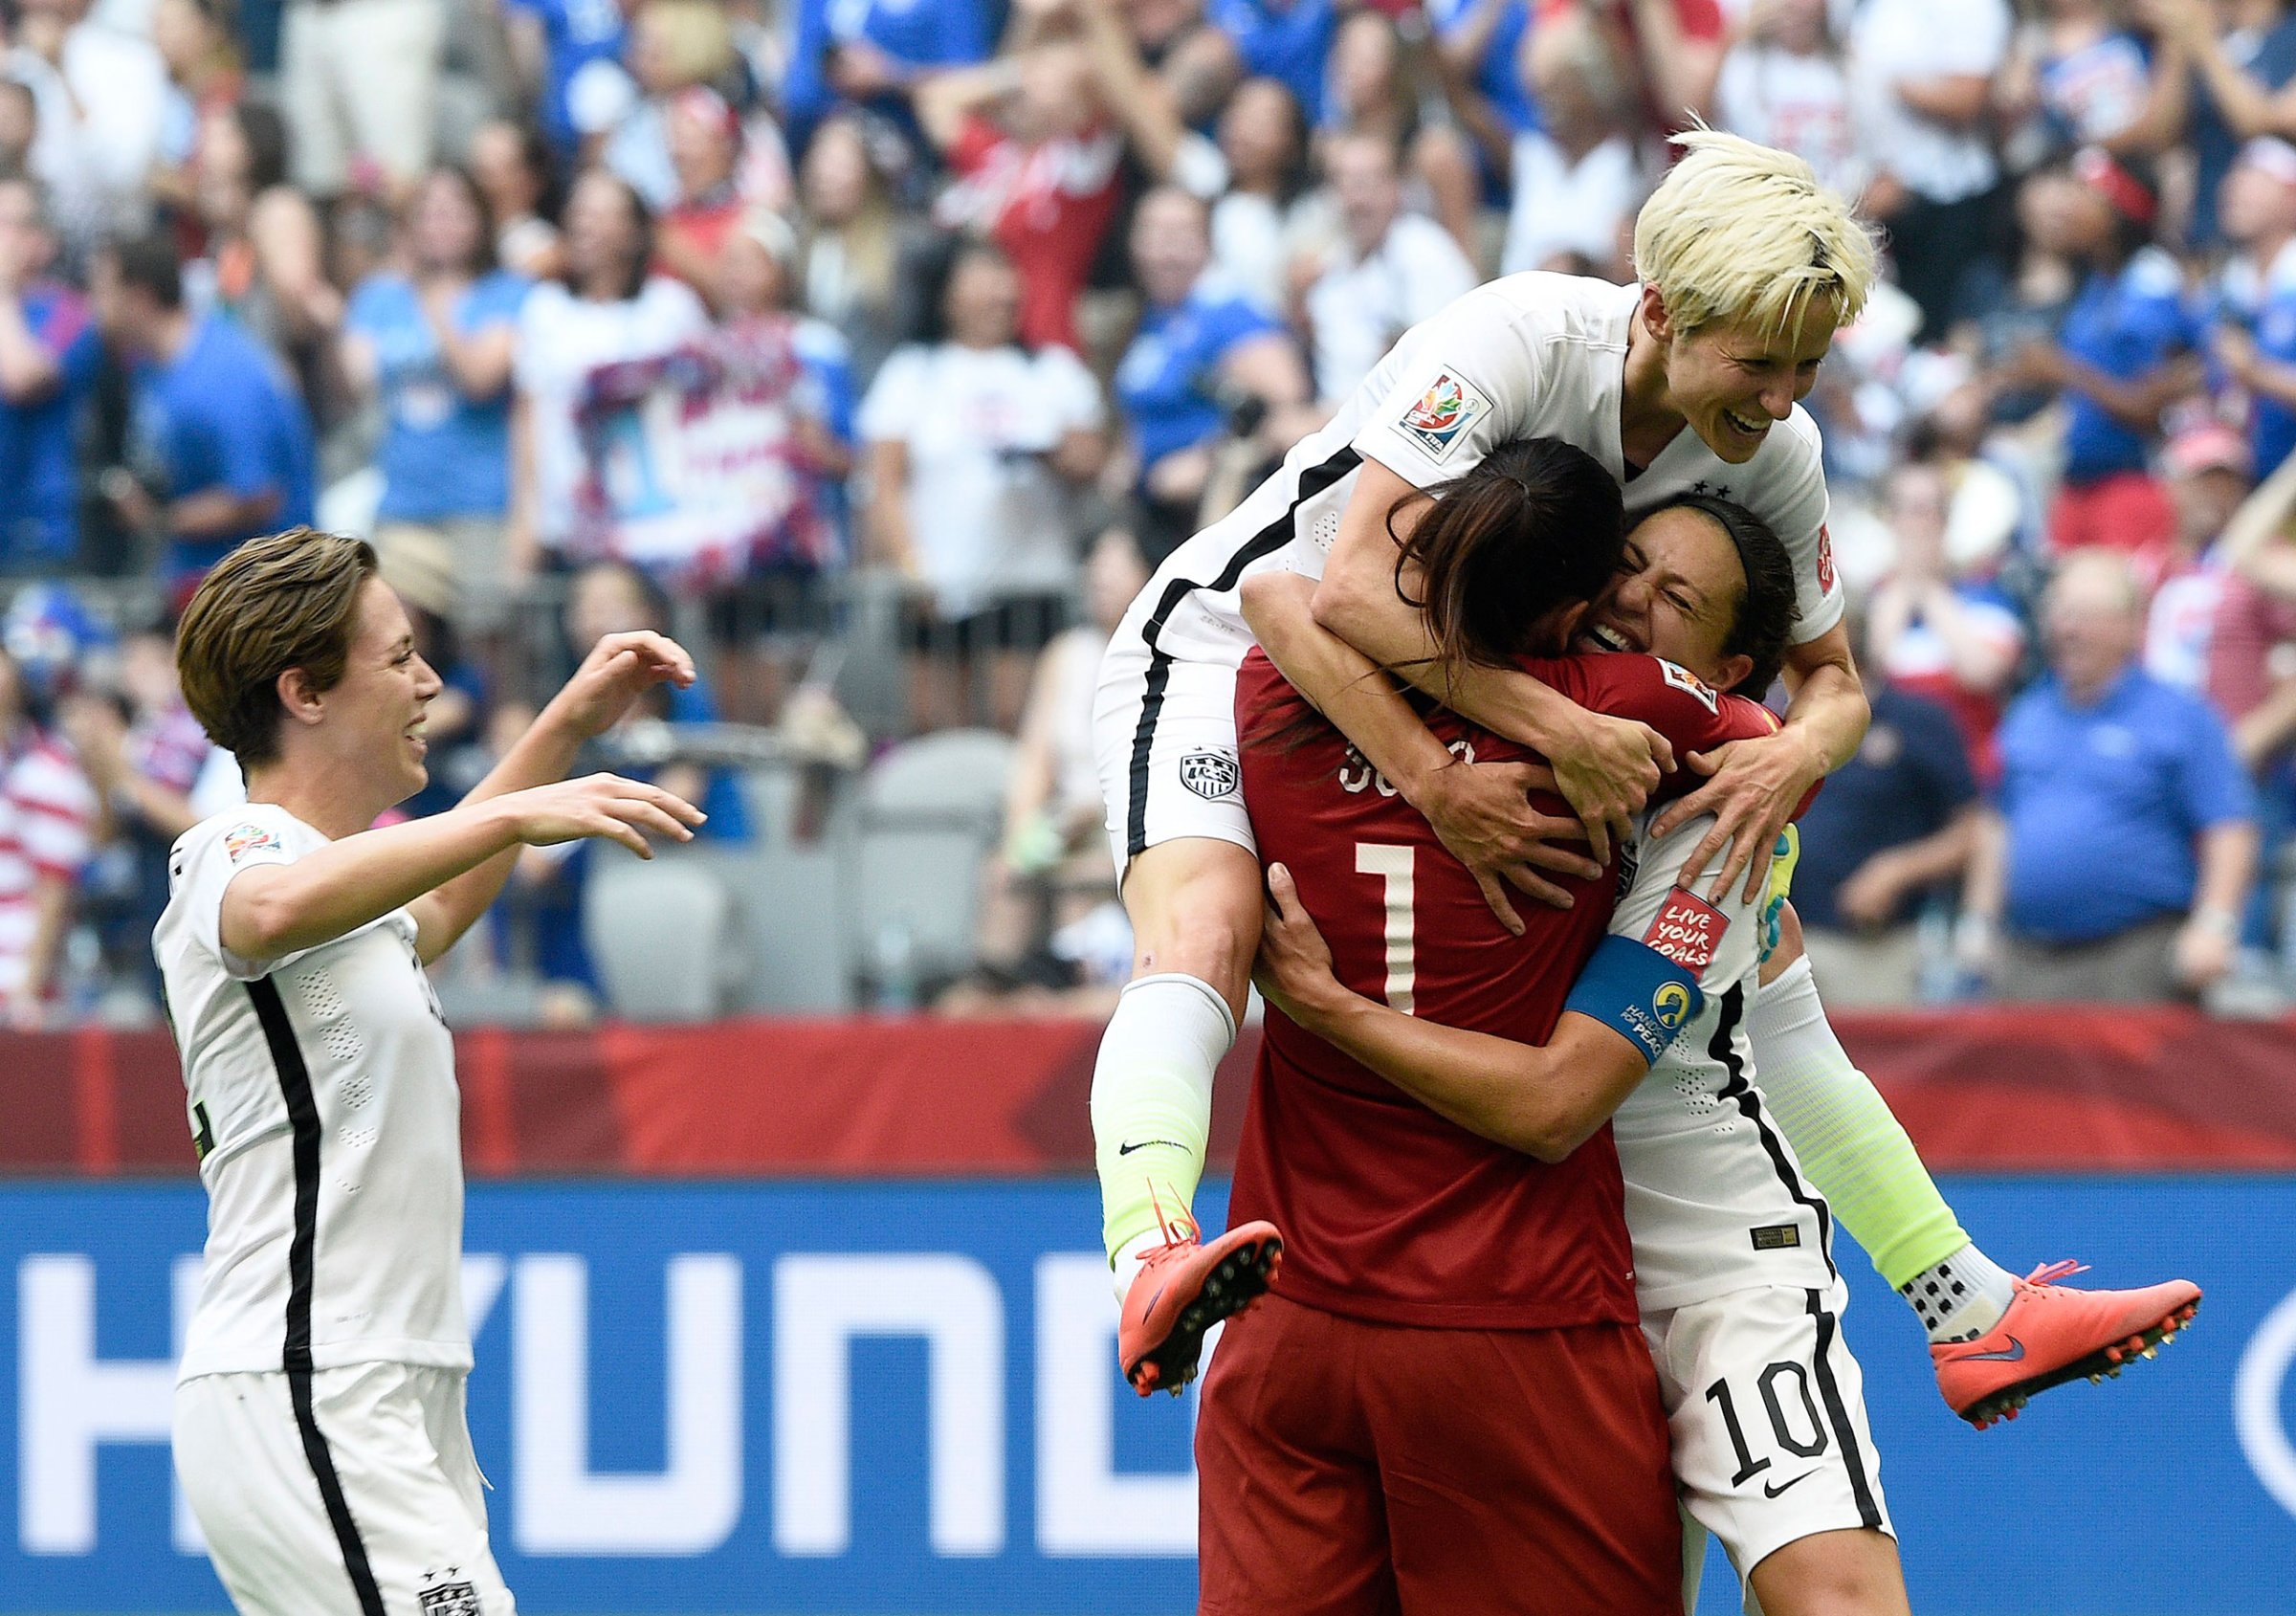 Carli Lloyd (10) is congratulated by goalkeeper Hope Solo (1) and midfielder Megan Rapinoe (top) after scoring a goal during the final match between USA and Japan during the 2015 FIFA Women's World Cup at the BC Place Stadium in Vancouver, Canada, July 5, 2015.